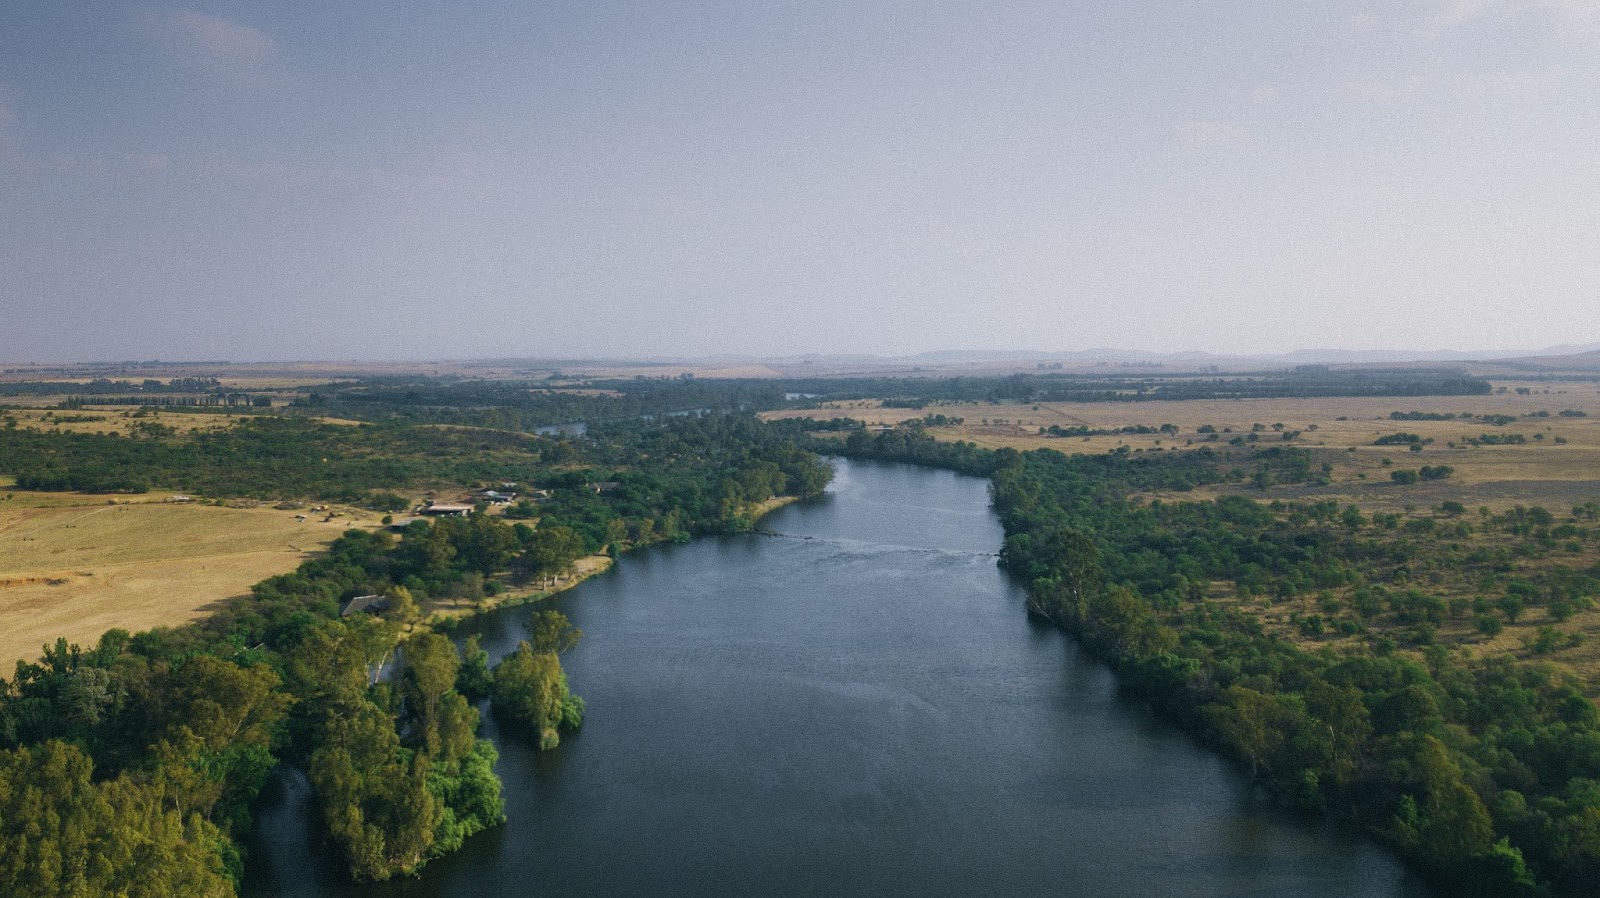 Aerial view of the Vaal River